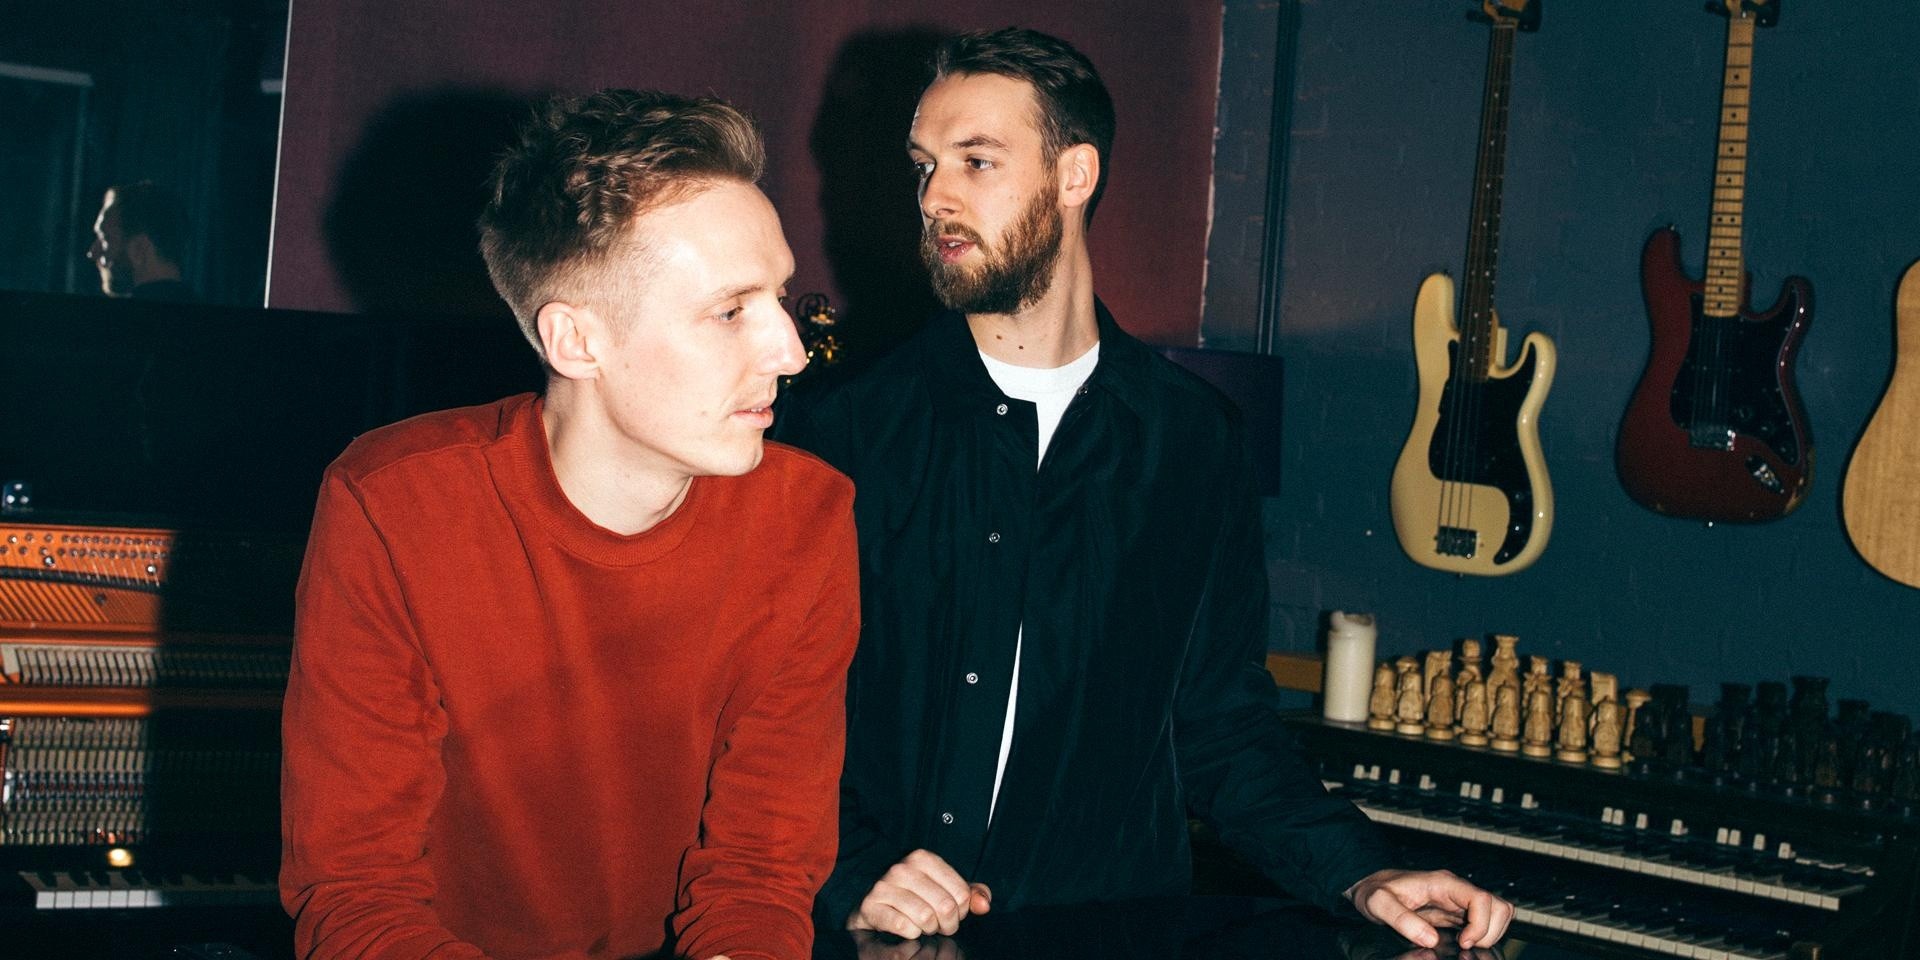 Honne to perform in Singapore in 2019 